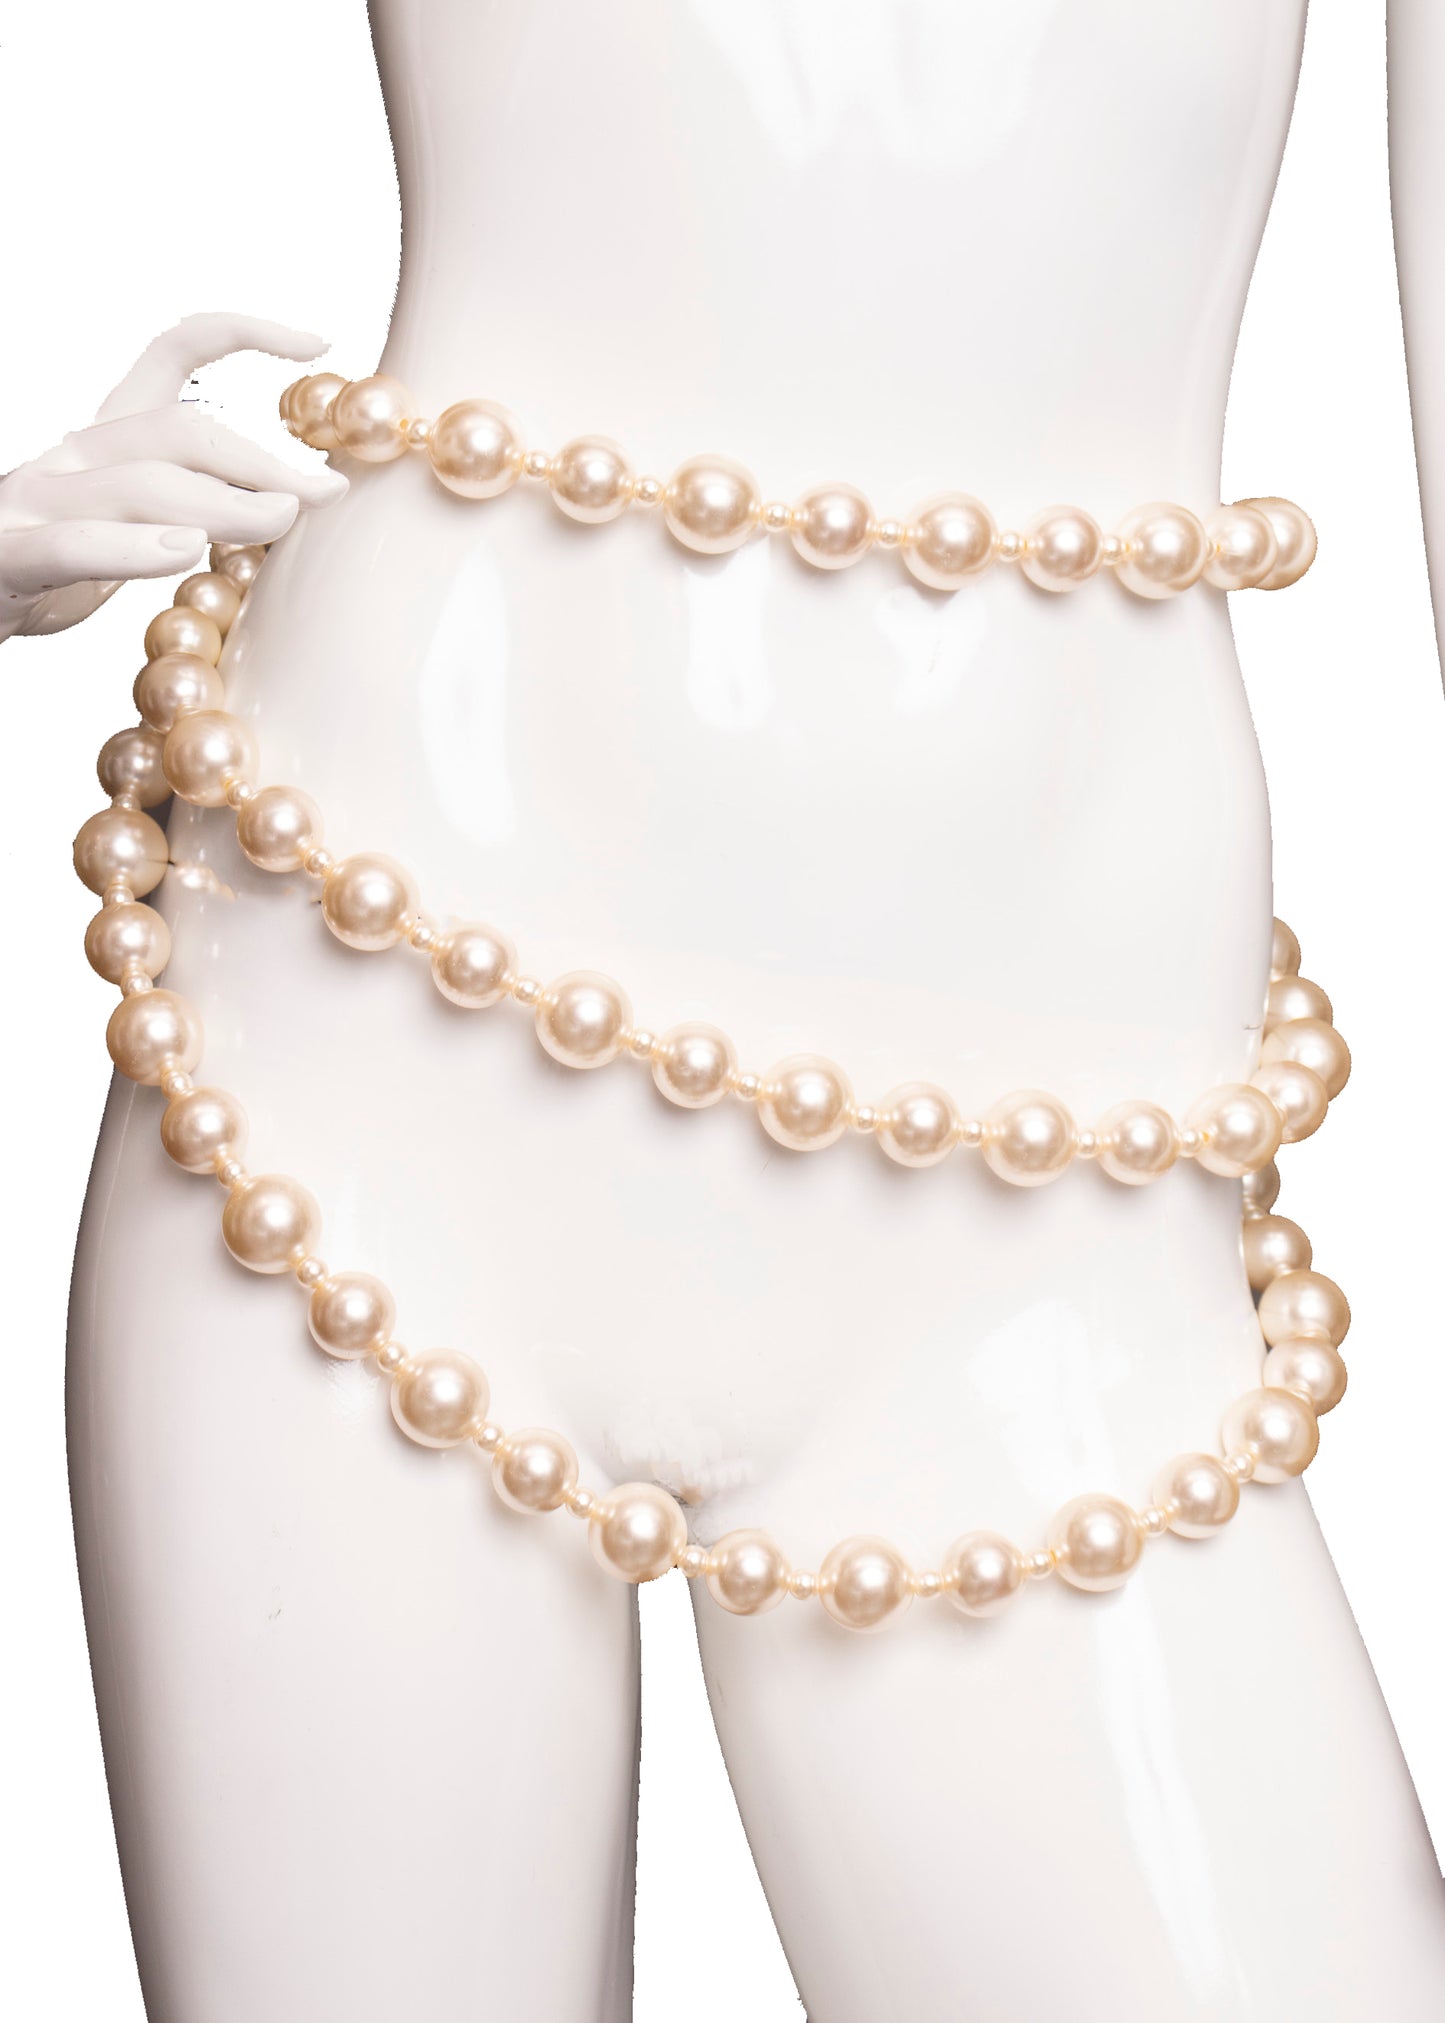 Kenneth Jay Lane Jumbo Pearl Necklace and Belt